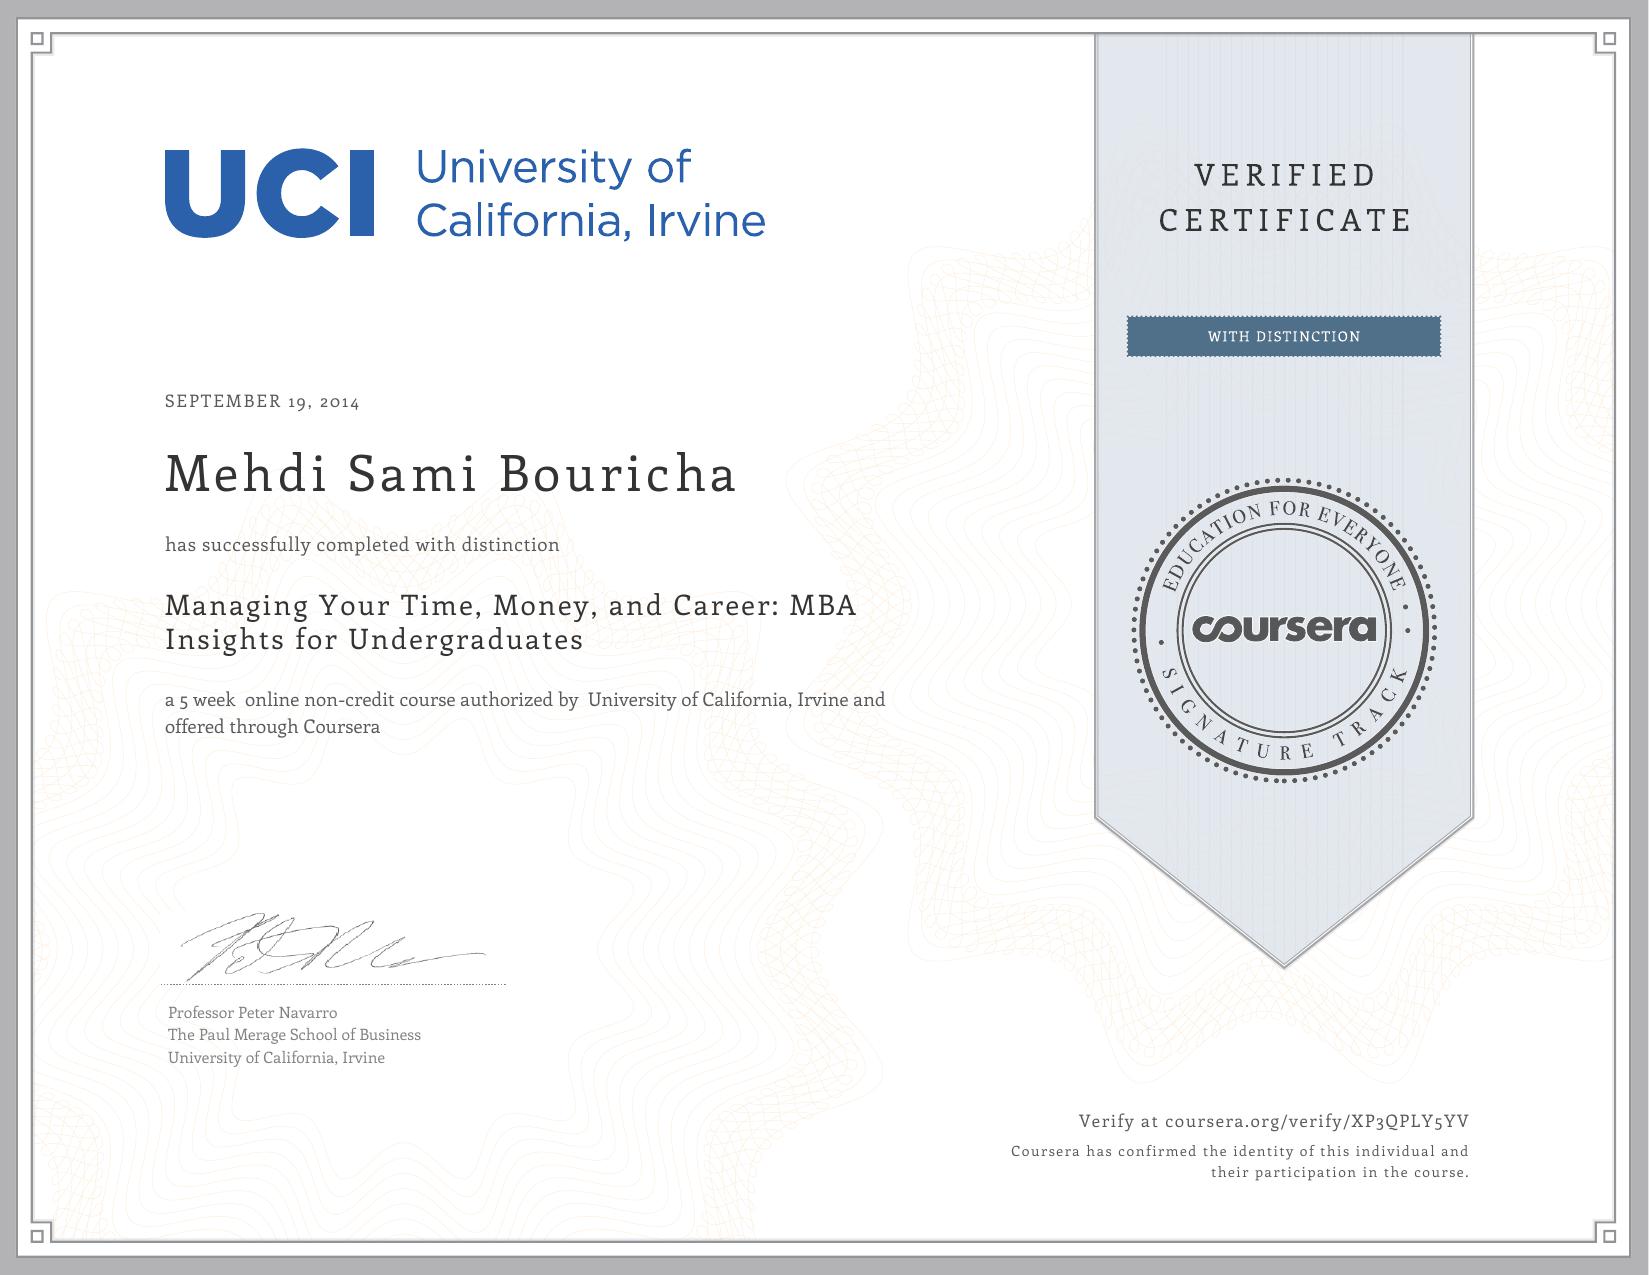 UCI University of California Irvine Managing your time, money and